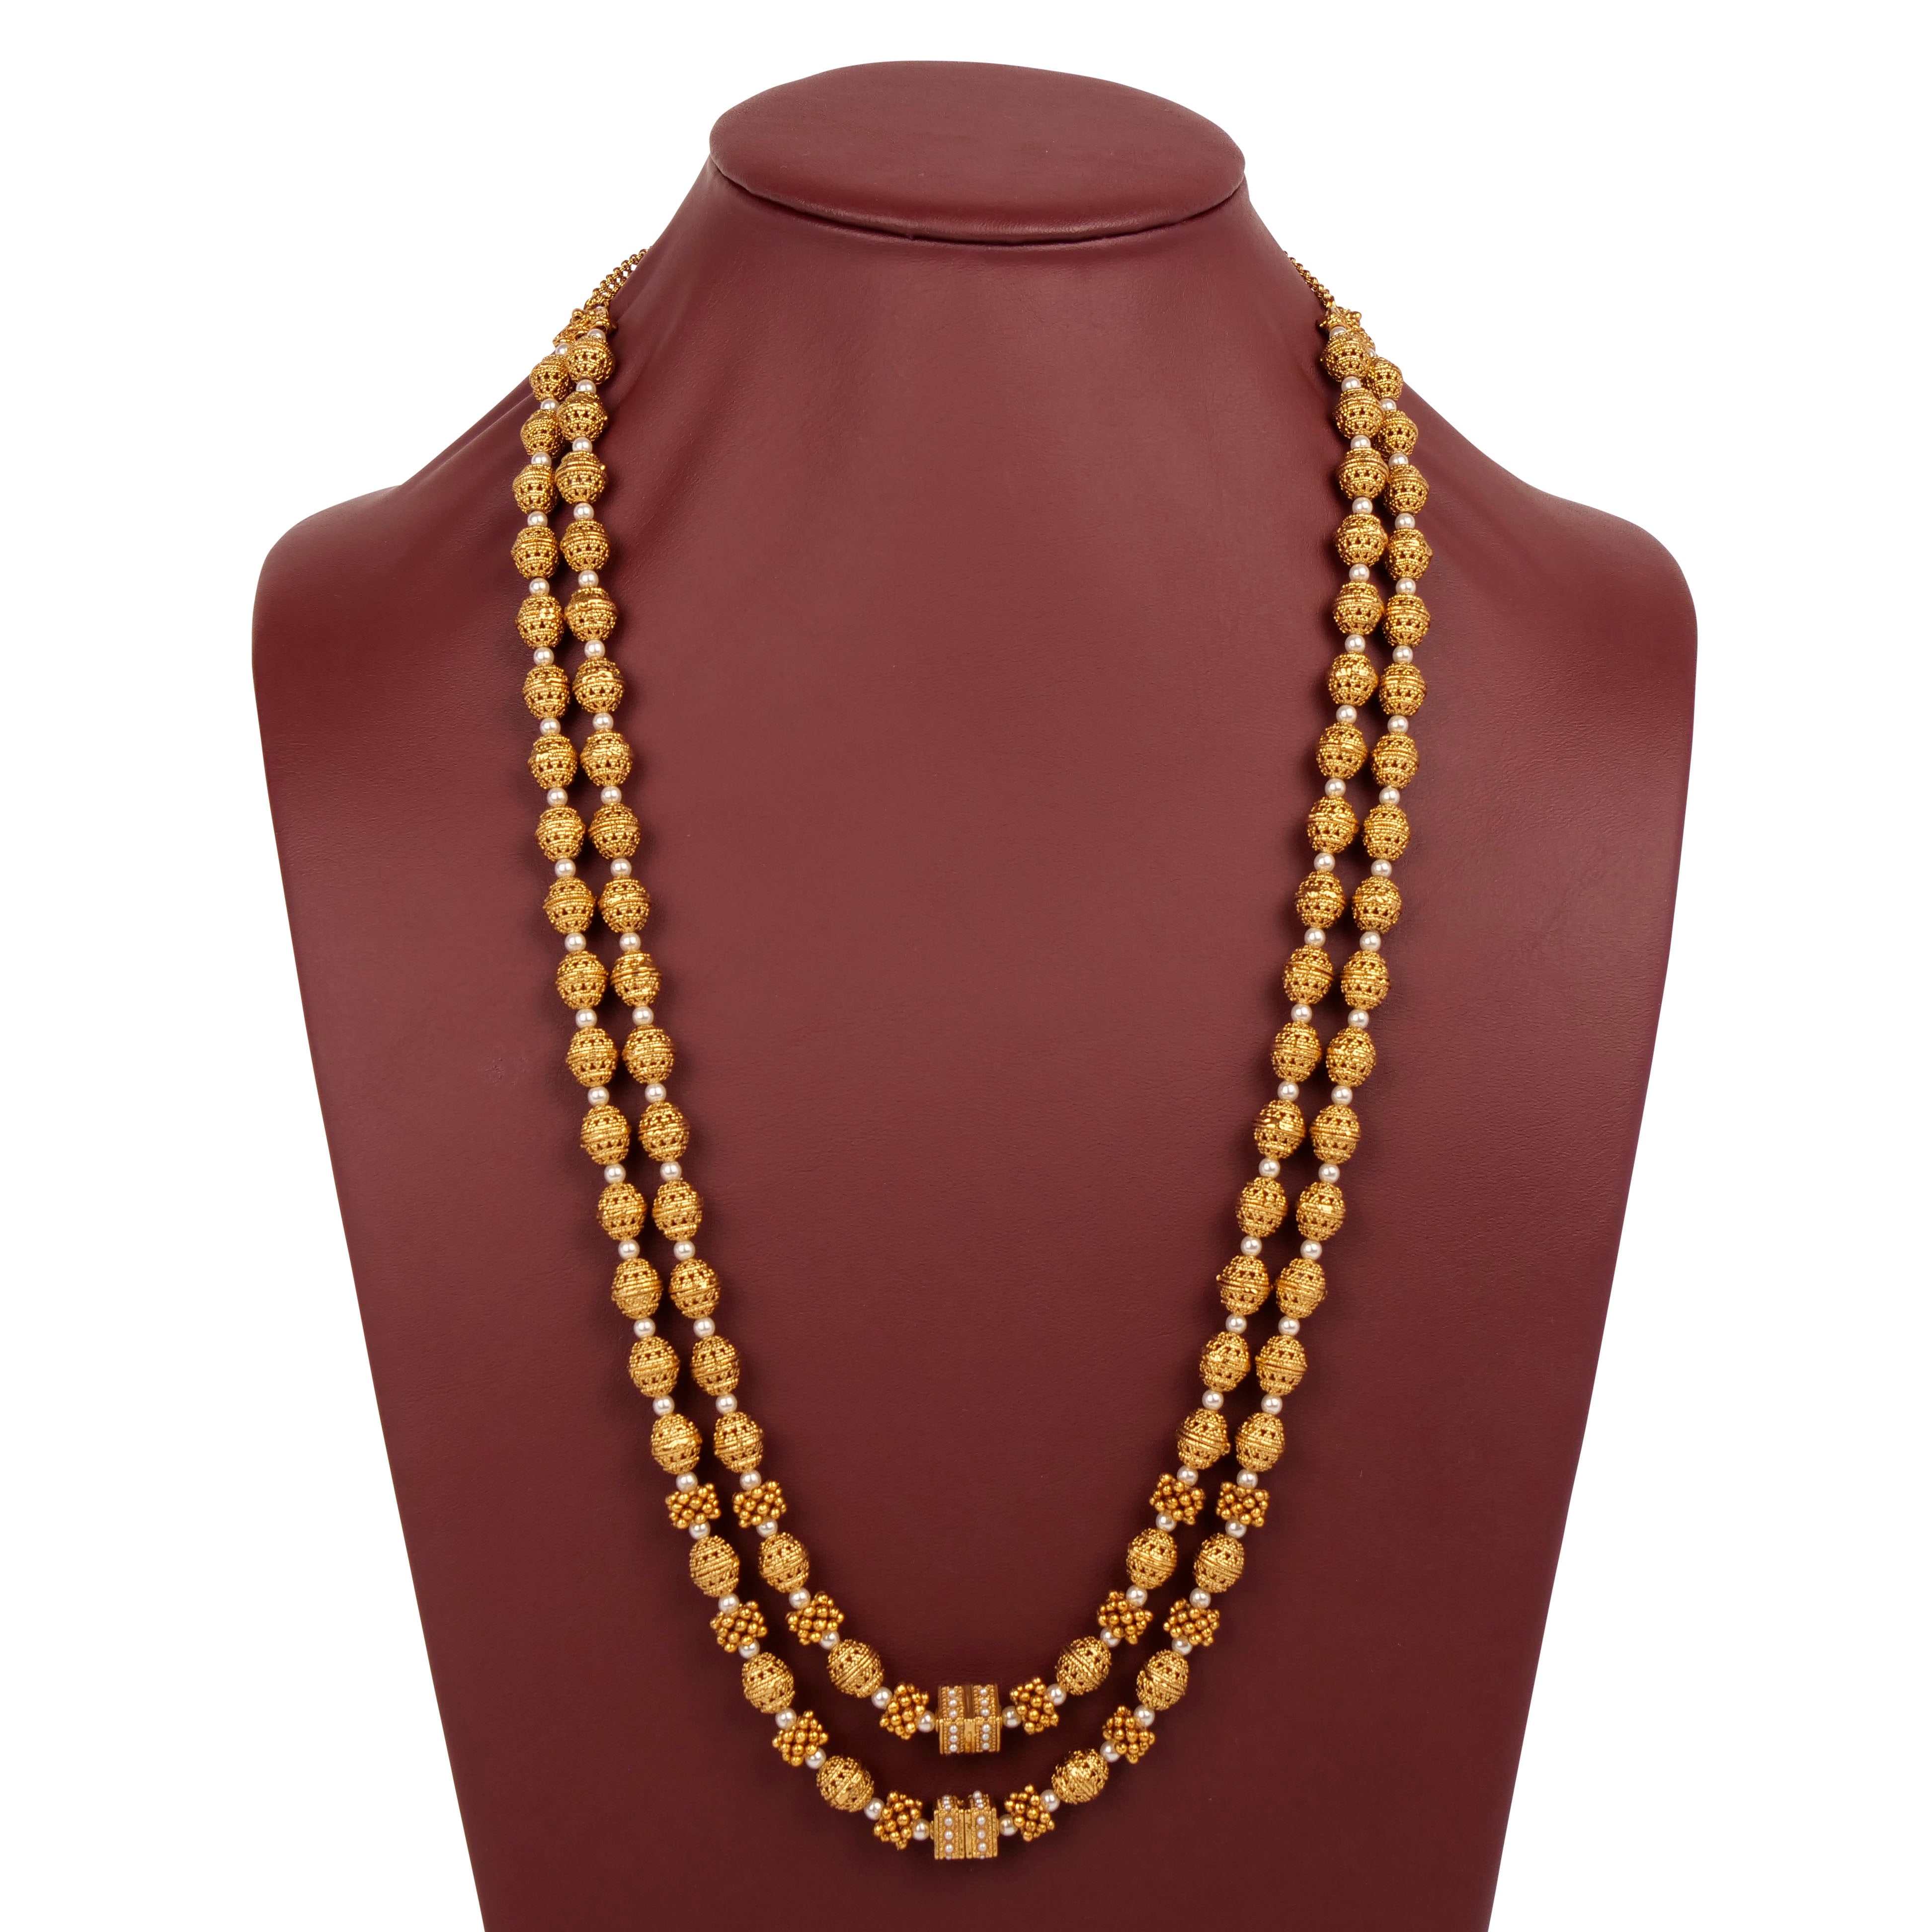 Reeva Layered Chain Set in Pearl